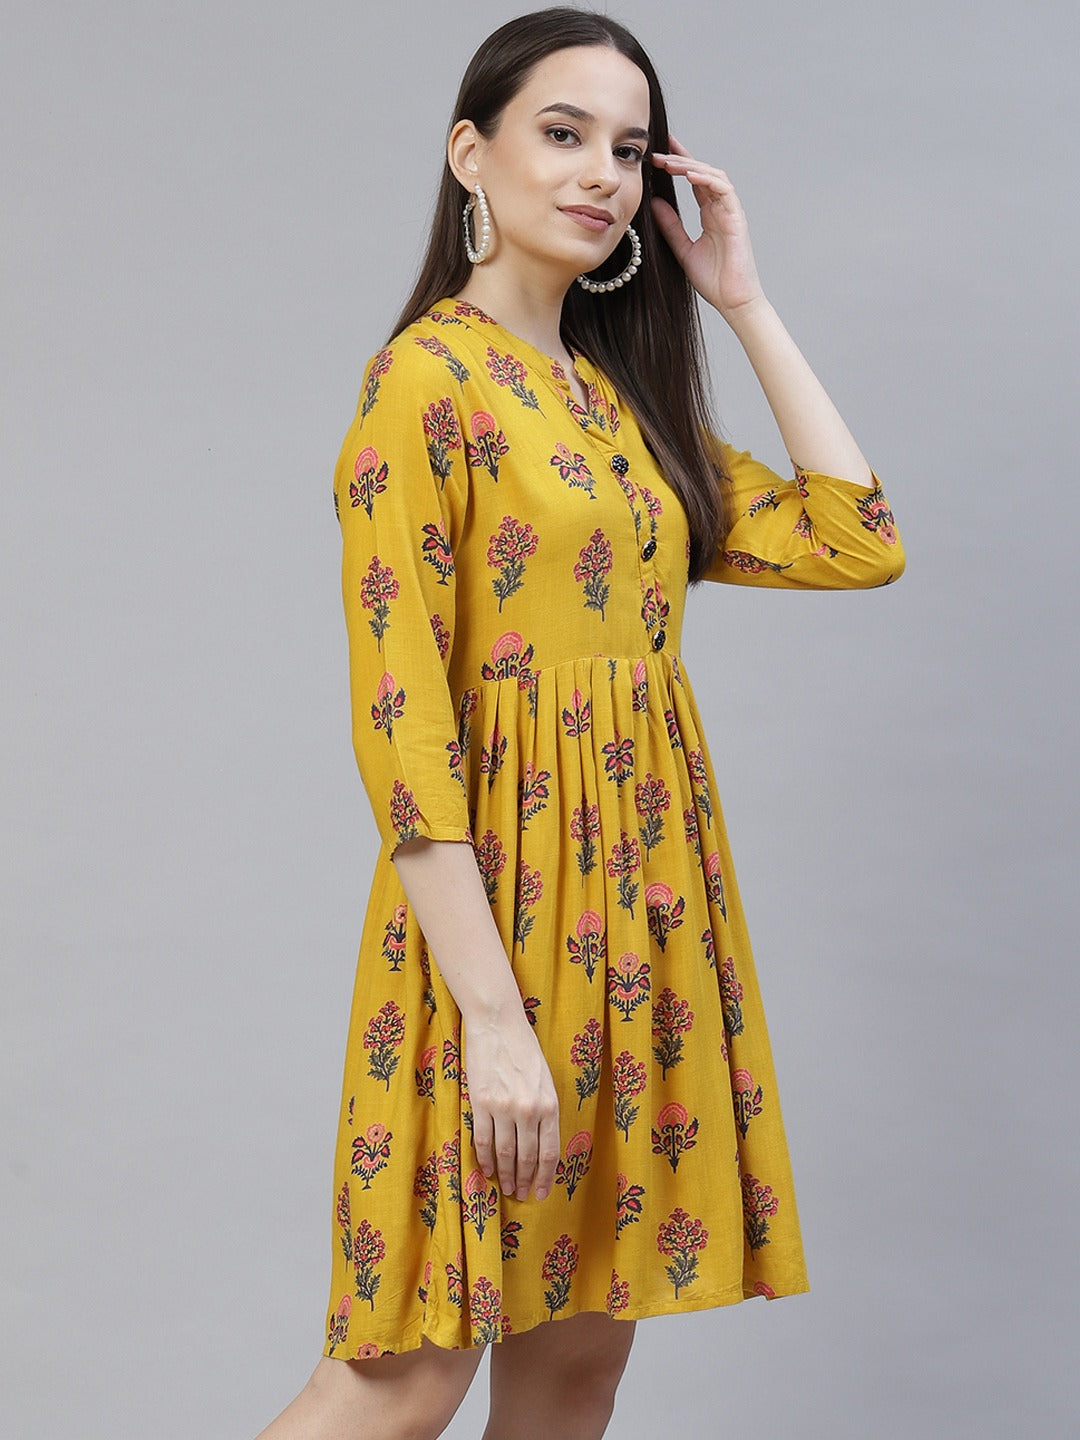 Women's mustard yellow and pink floral printed flared short dress - Meeranshi